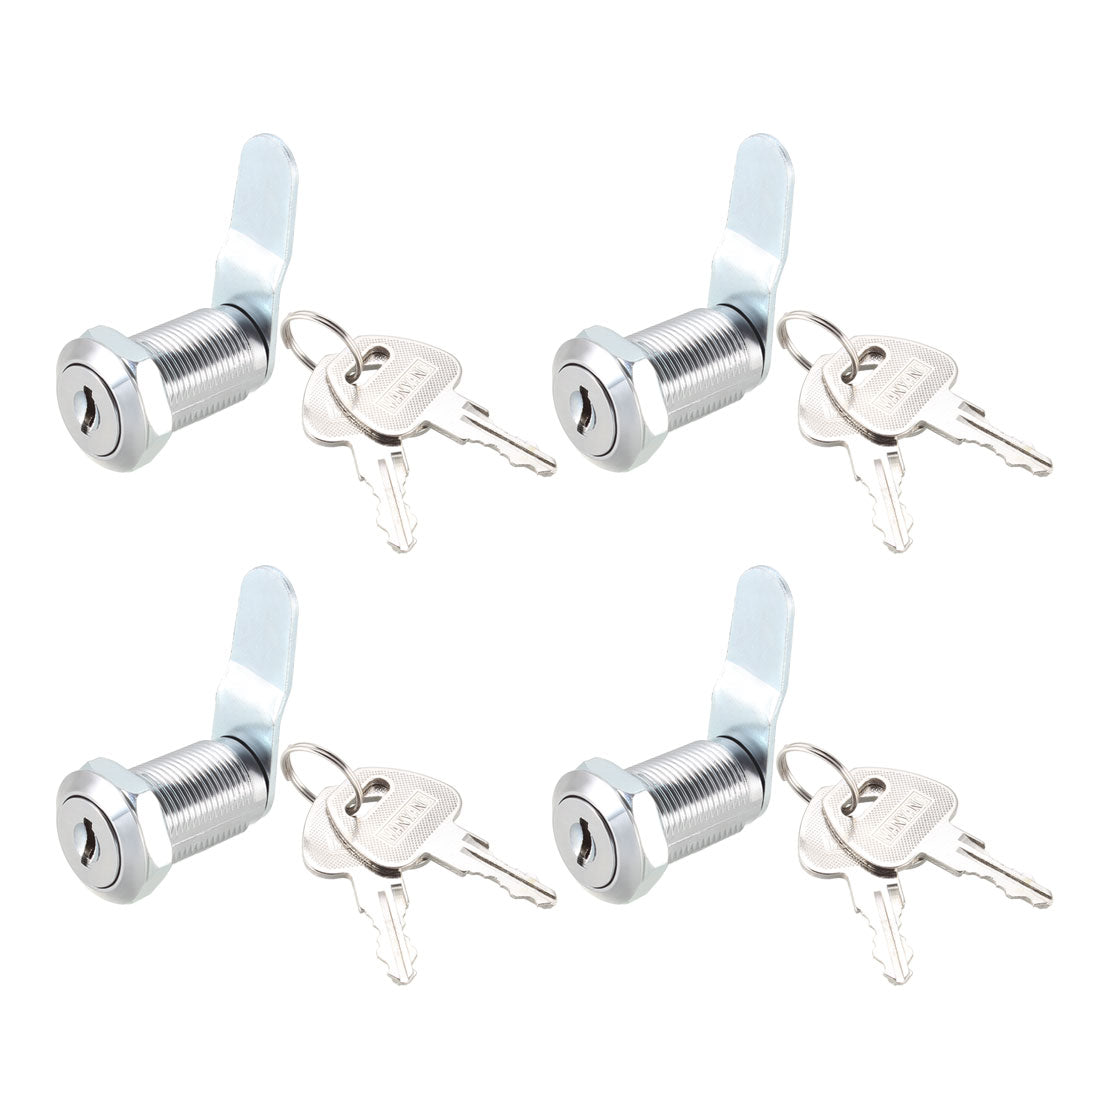 uxcell Uxcell Cam Locks 30mm Cylinder Length Fit on Max 7/8-inch Panel Keyed Different 4Pcs